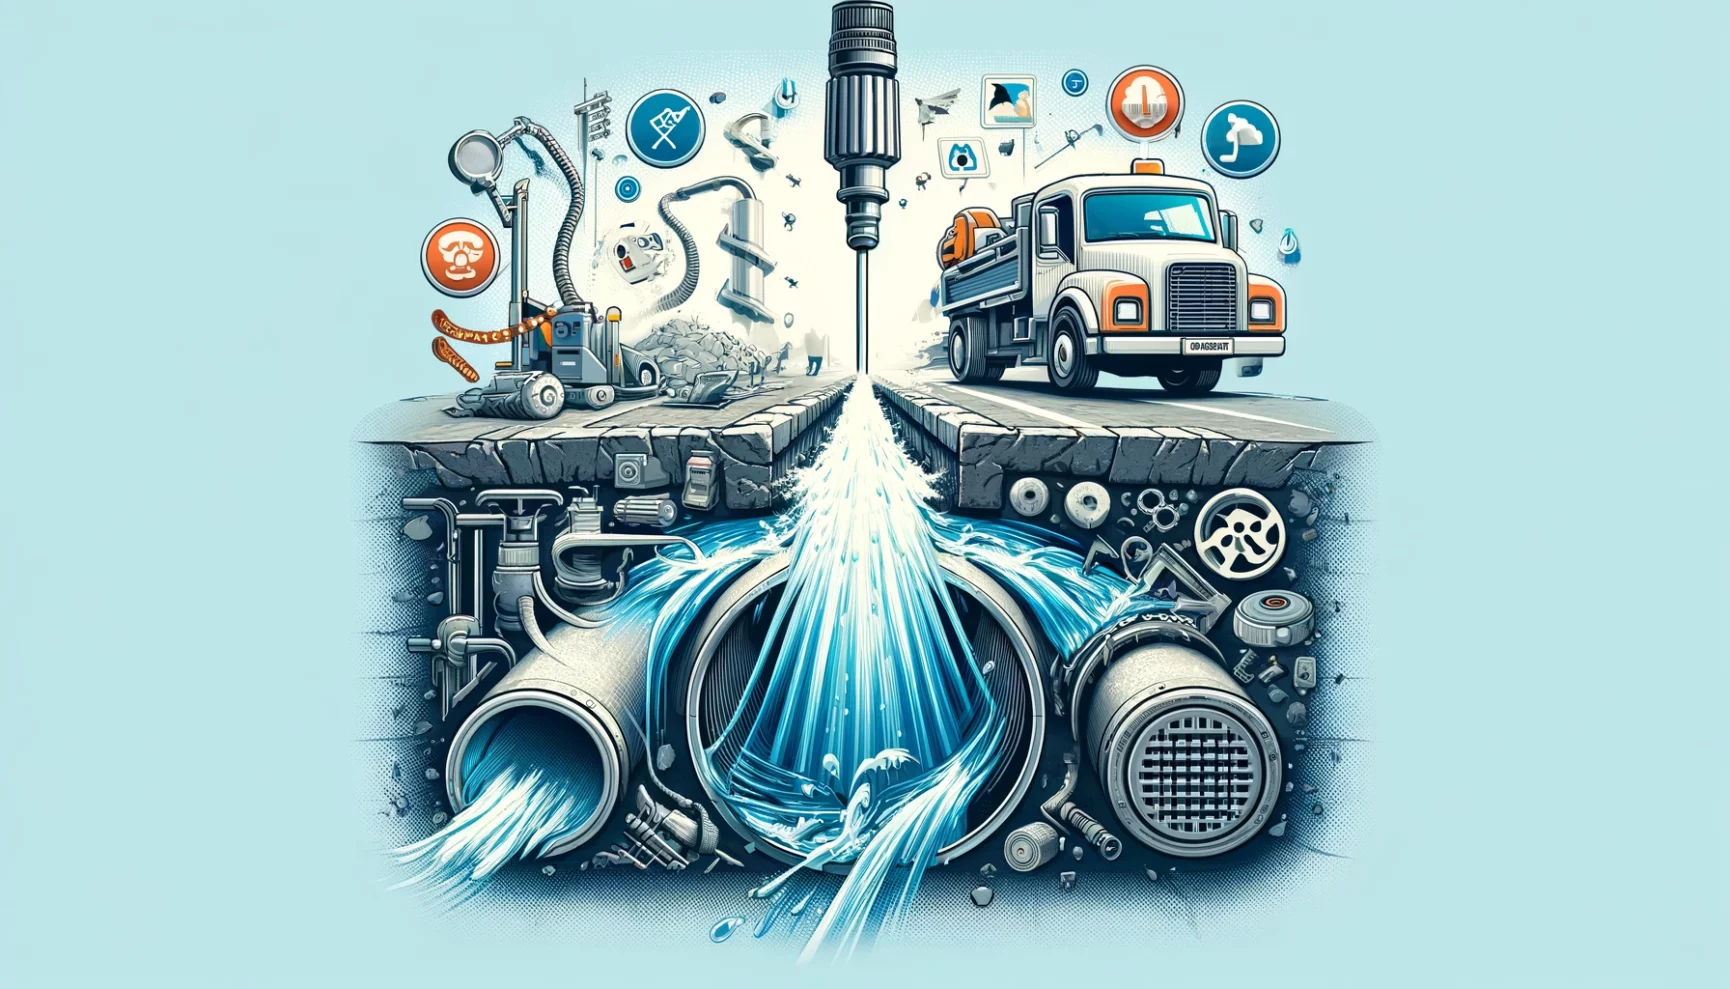 Illustration of water supply infrastructure with a cross-section view, showing pipes, a water treatment facility, and related icons representing urban water services.